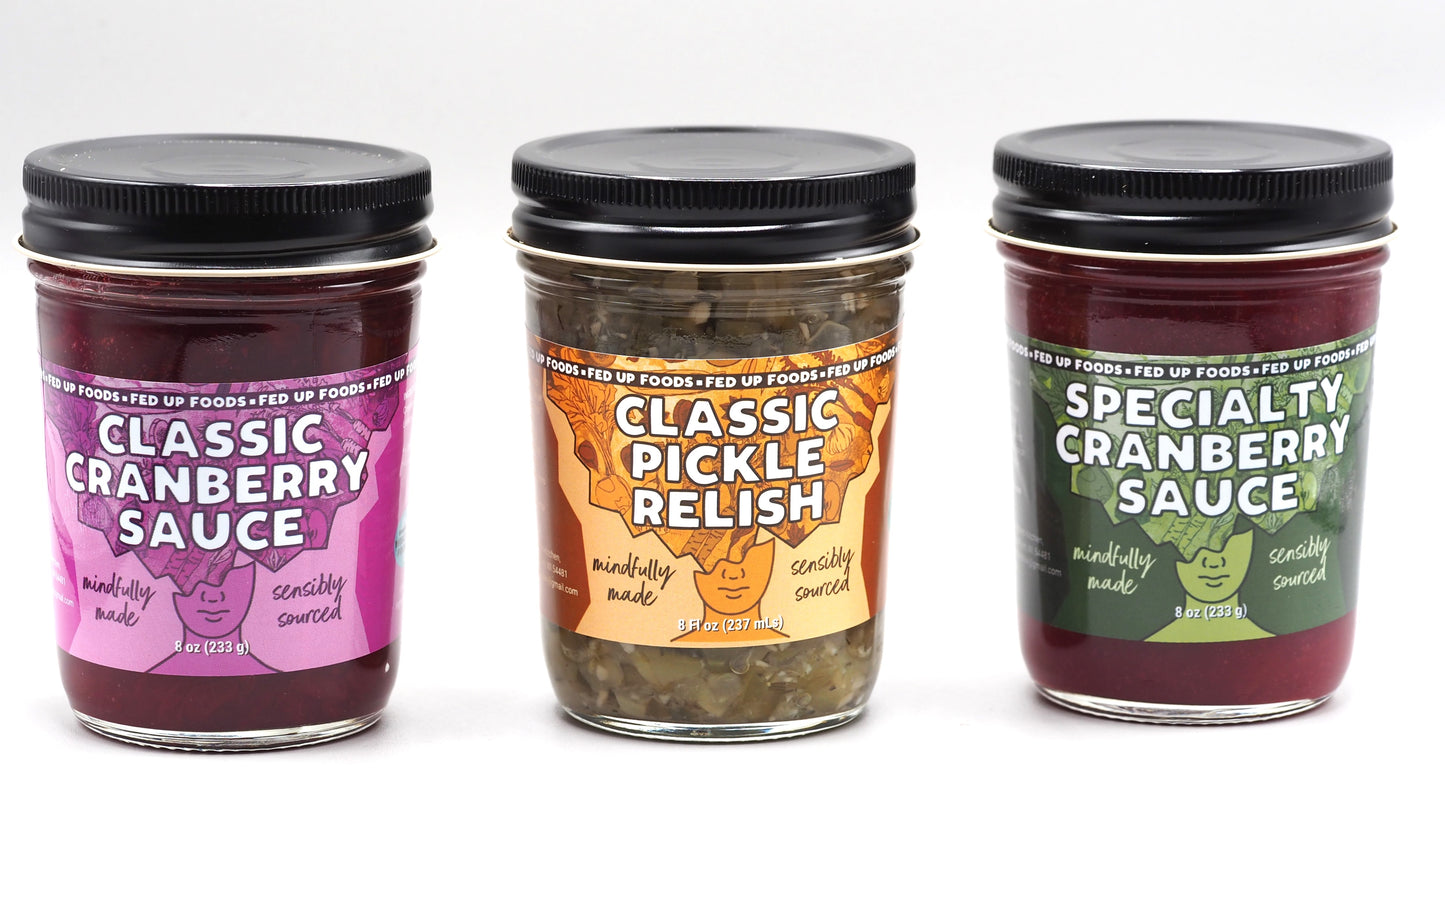 Fed Up Foods variety pack 3 pack 8 oz jars classic cranberry sauce dill pickle relish specialty cranberry sauce